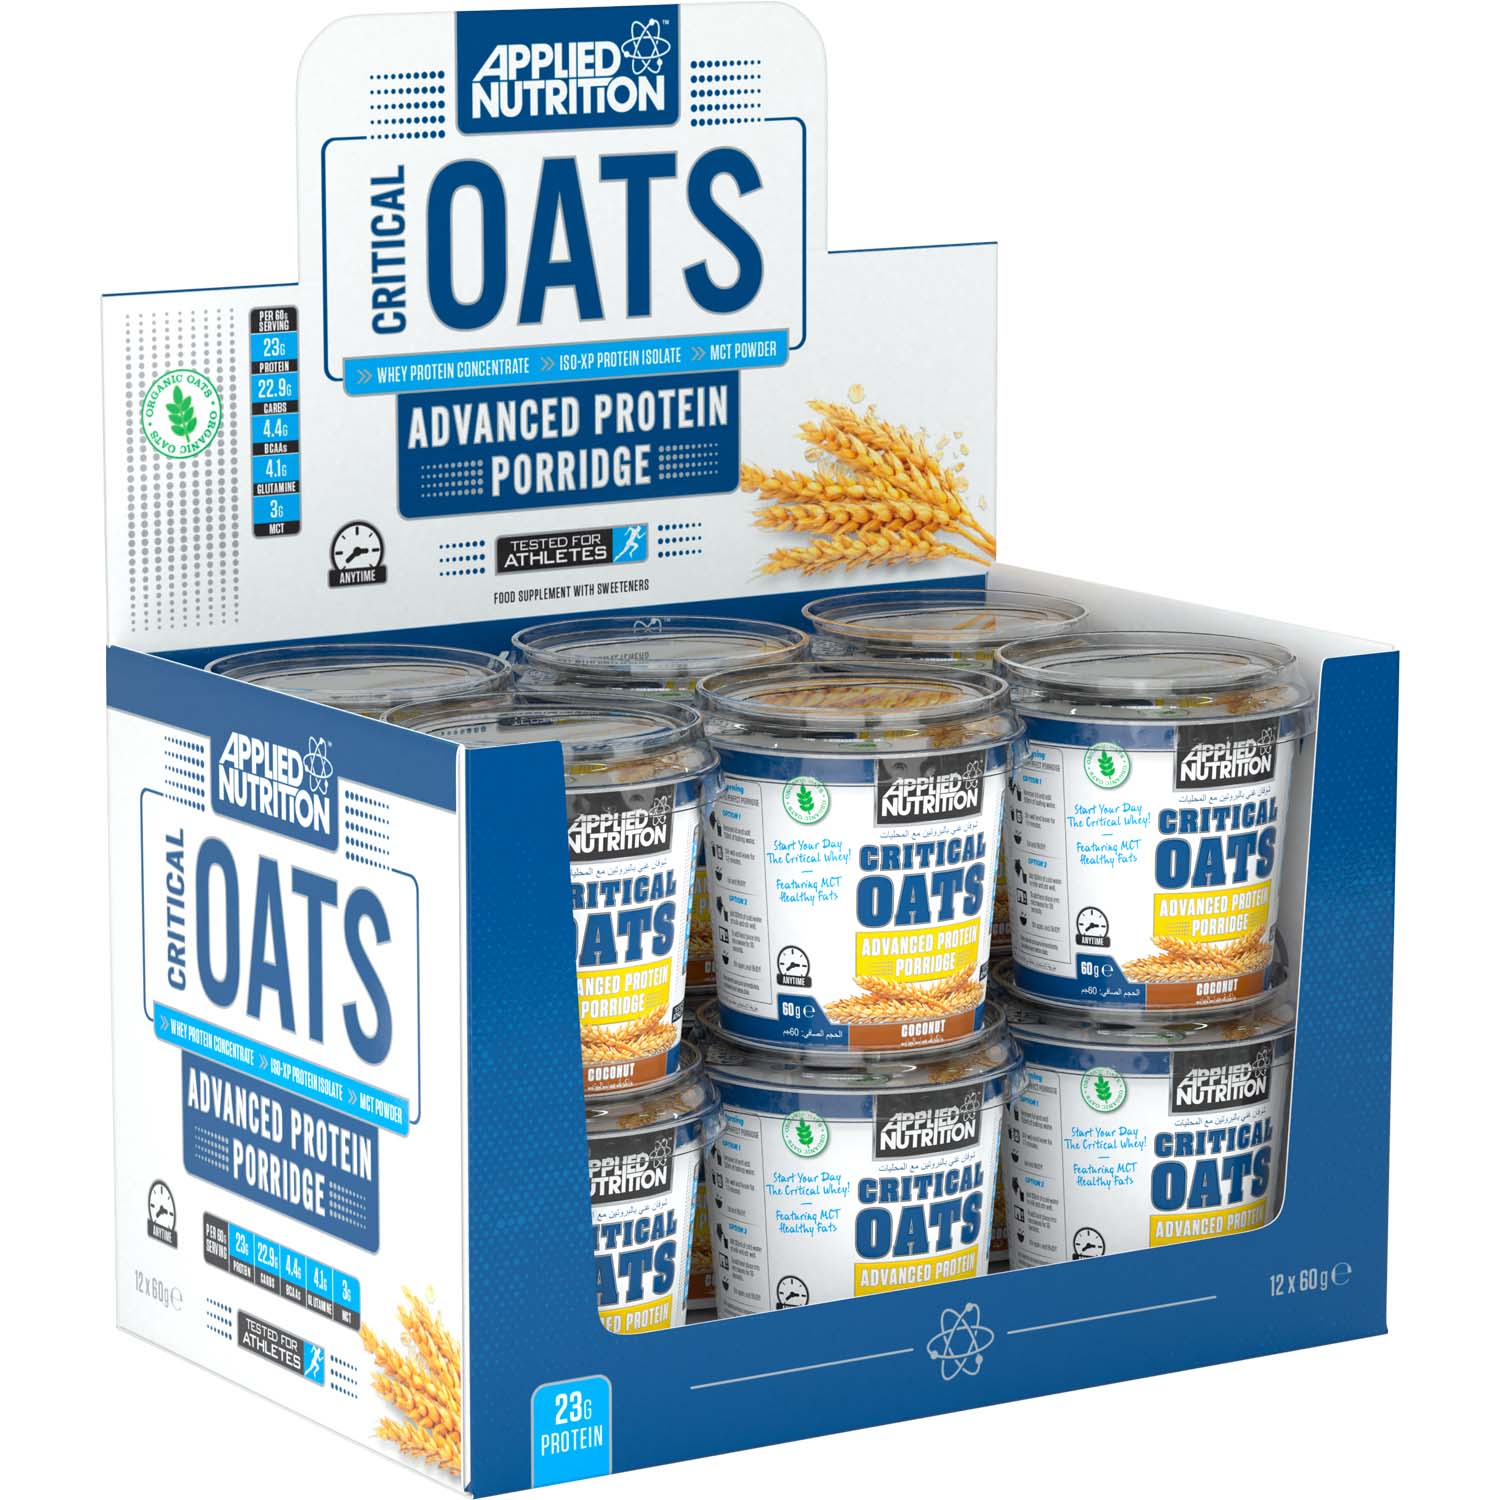 Applied Nutrition Critical Oats Box of 12 Pieces Coconut